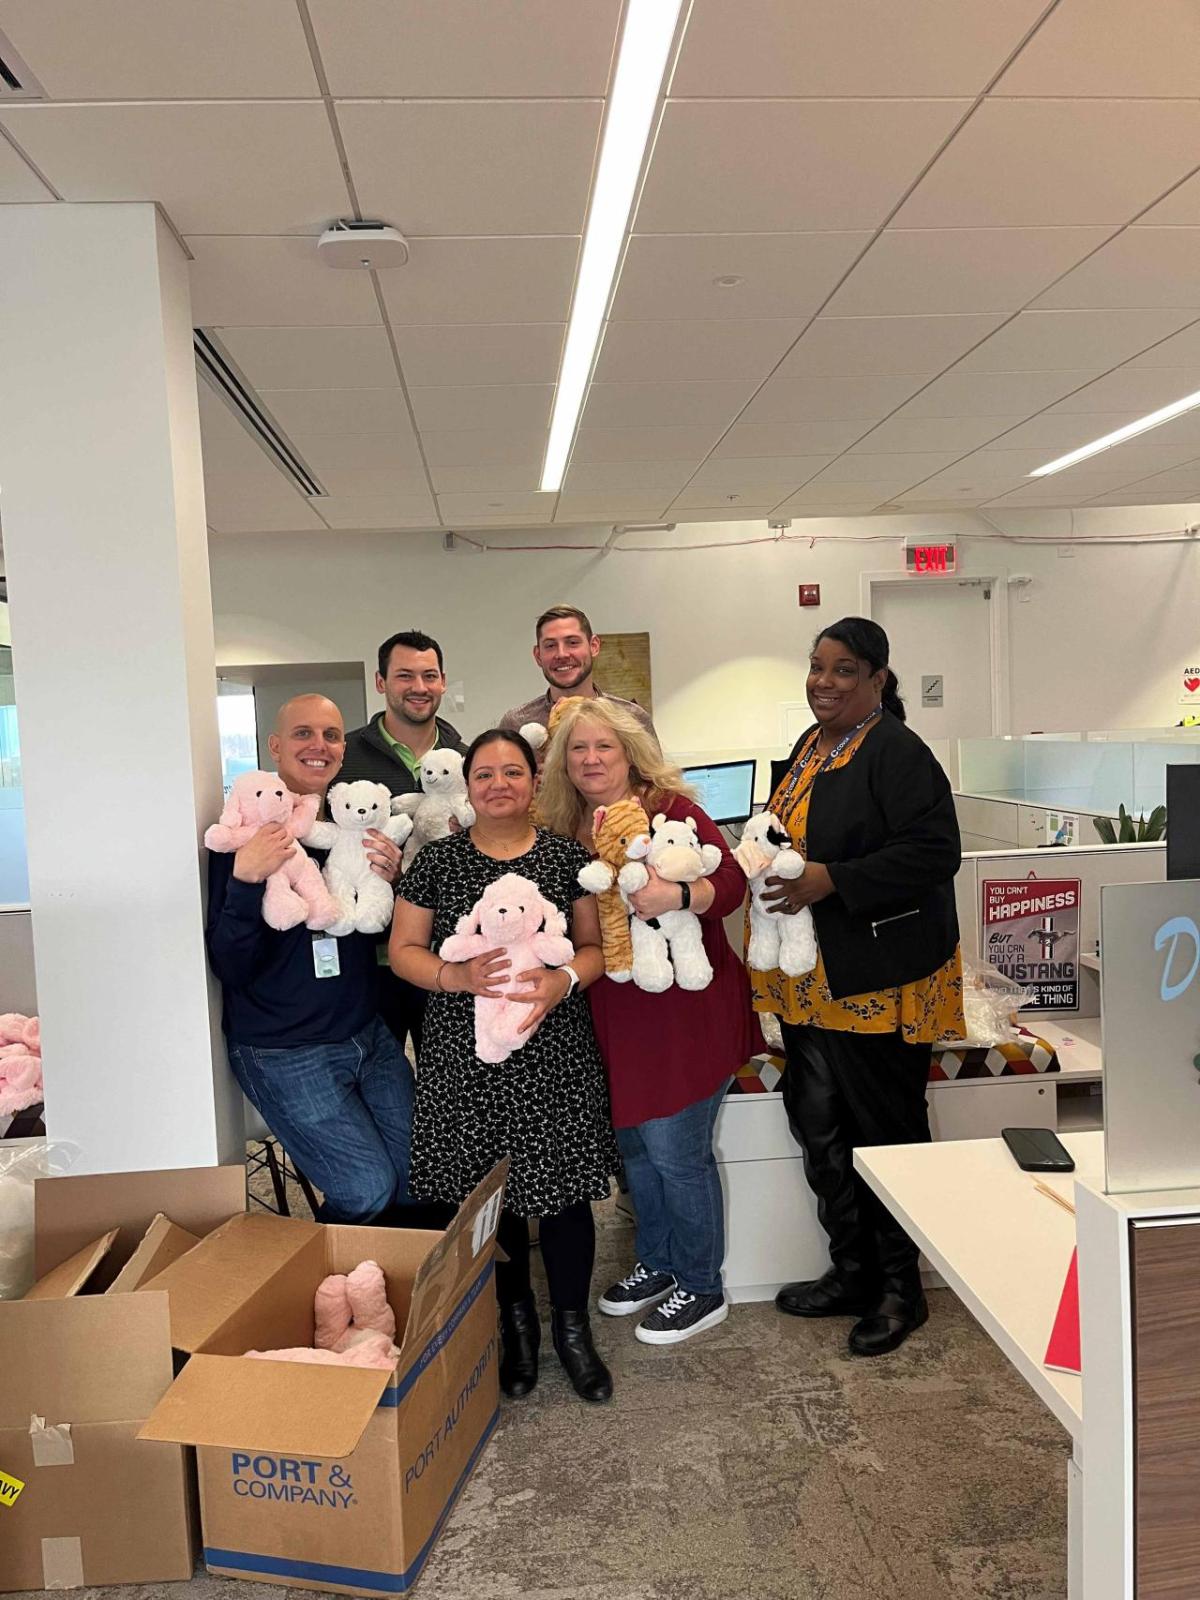 Covia employees pose with teddy bears for charities and hospitals